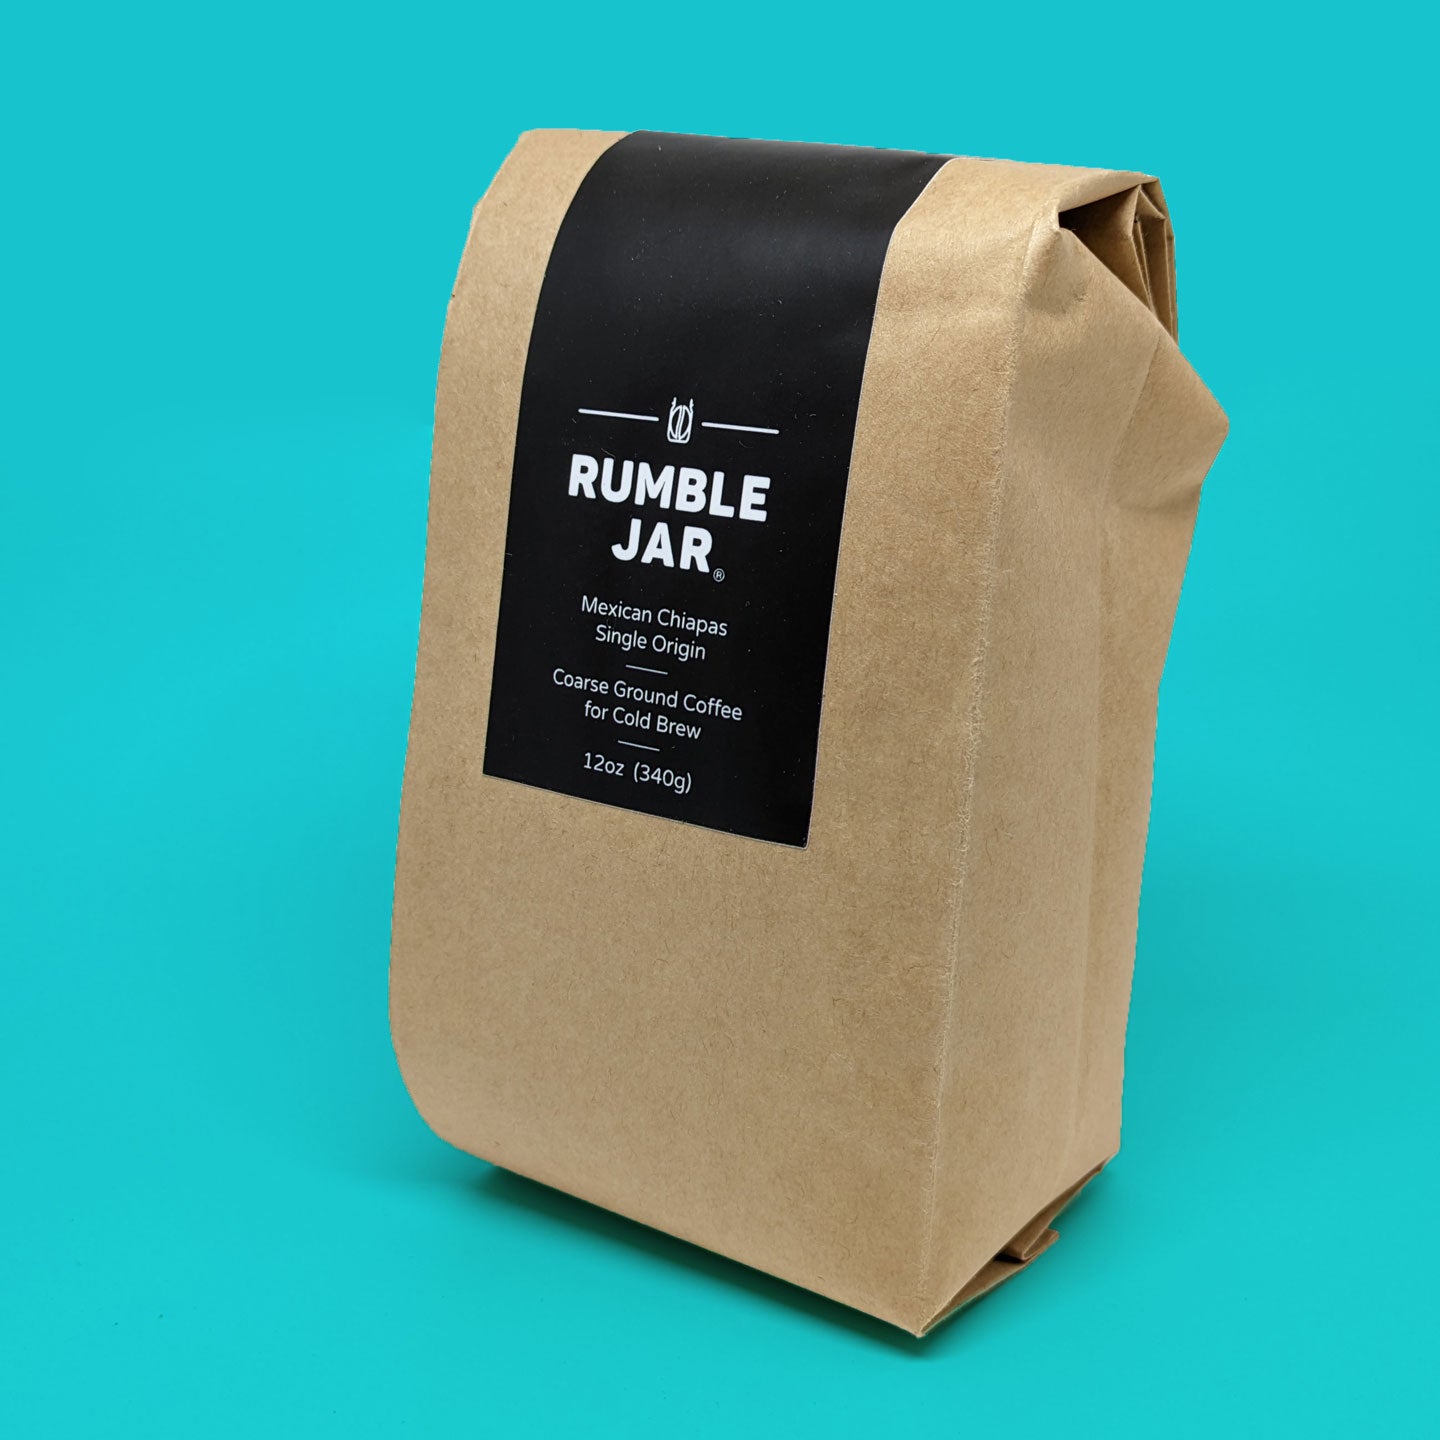 Coarse Ground Coffee for Cold Brew (12oz) – Rumble Jar